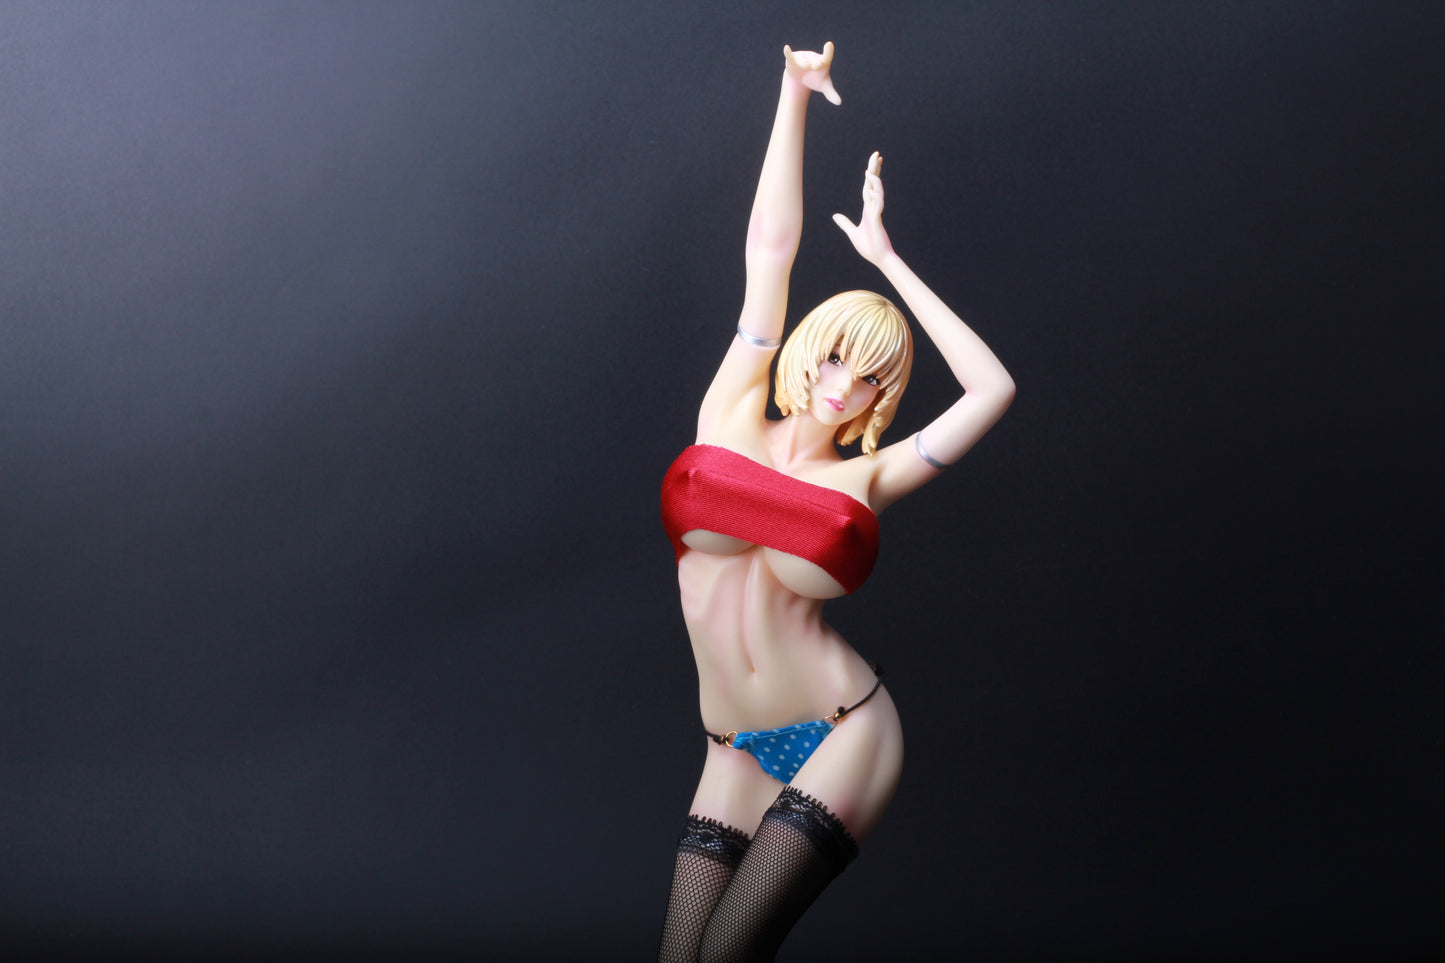 STRIKE WITCHES Erica Hartmann 1/5 naked anime figure sexy resin figure girl